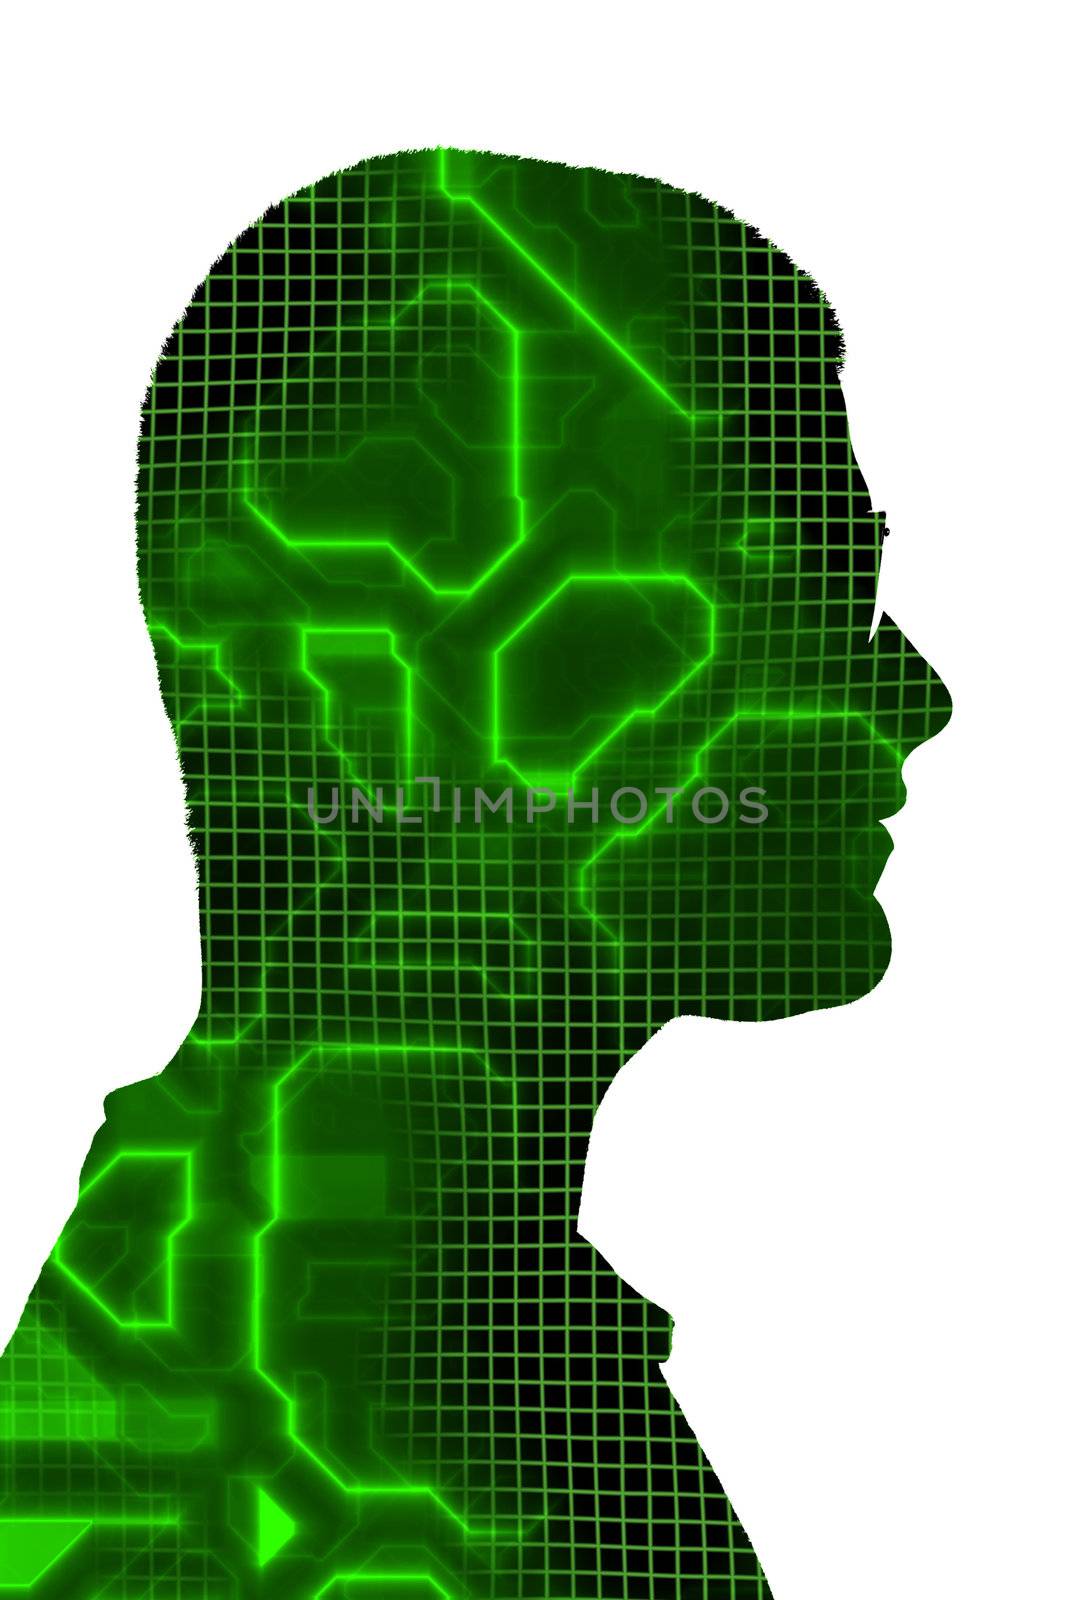 Circuitry Silhouette by graficallyminded